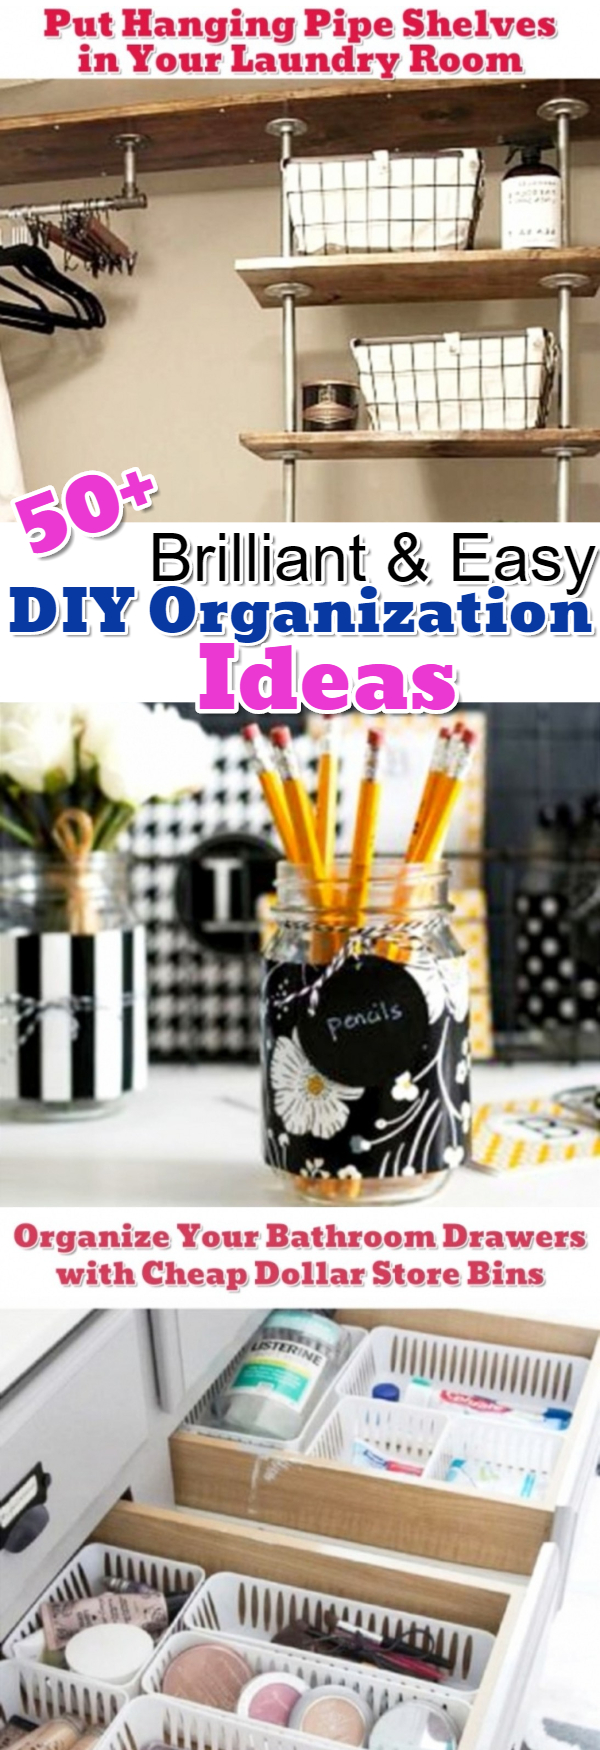 Some of the best getting organized help and DIY ideas I've seen on Pinterest Get organized! 